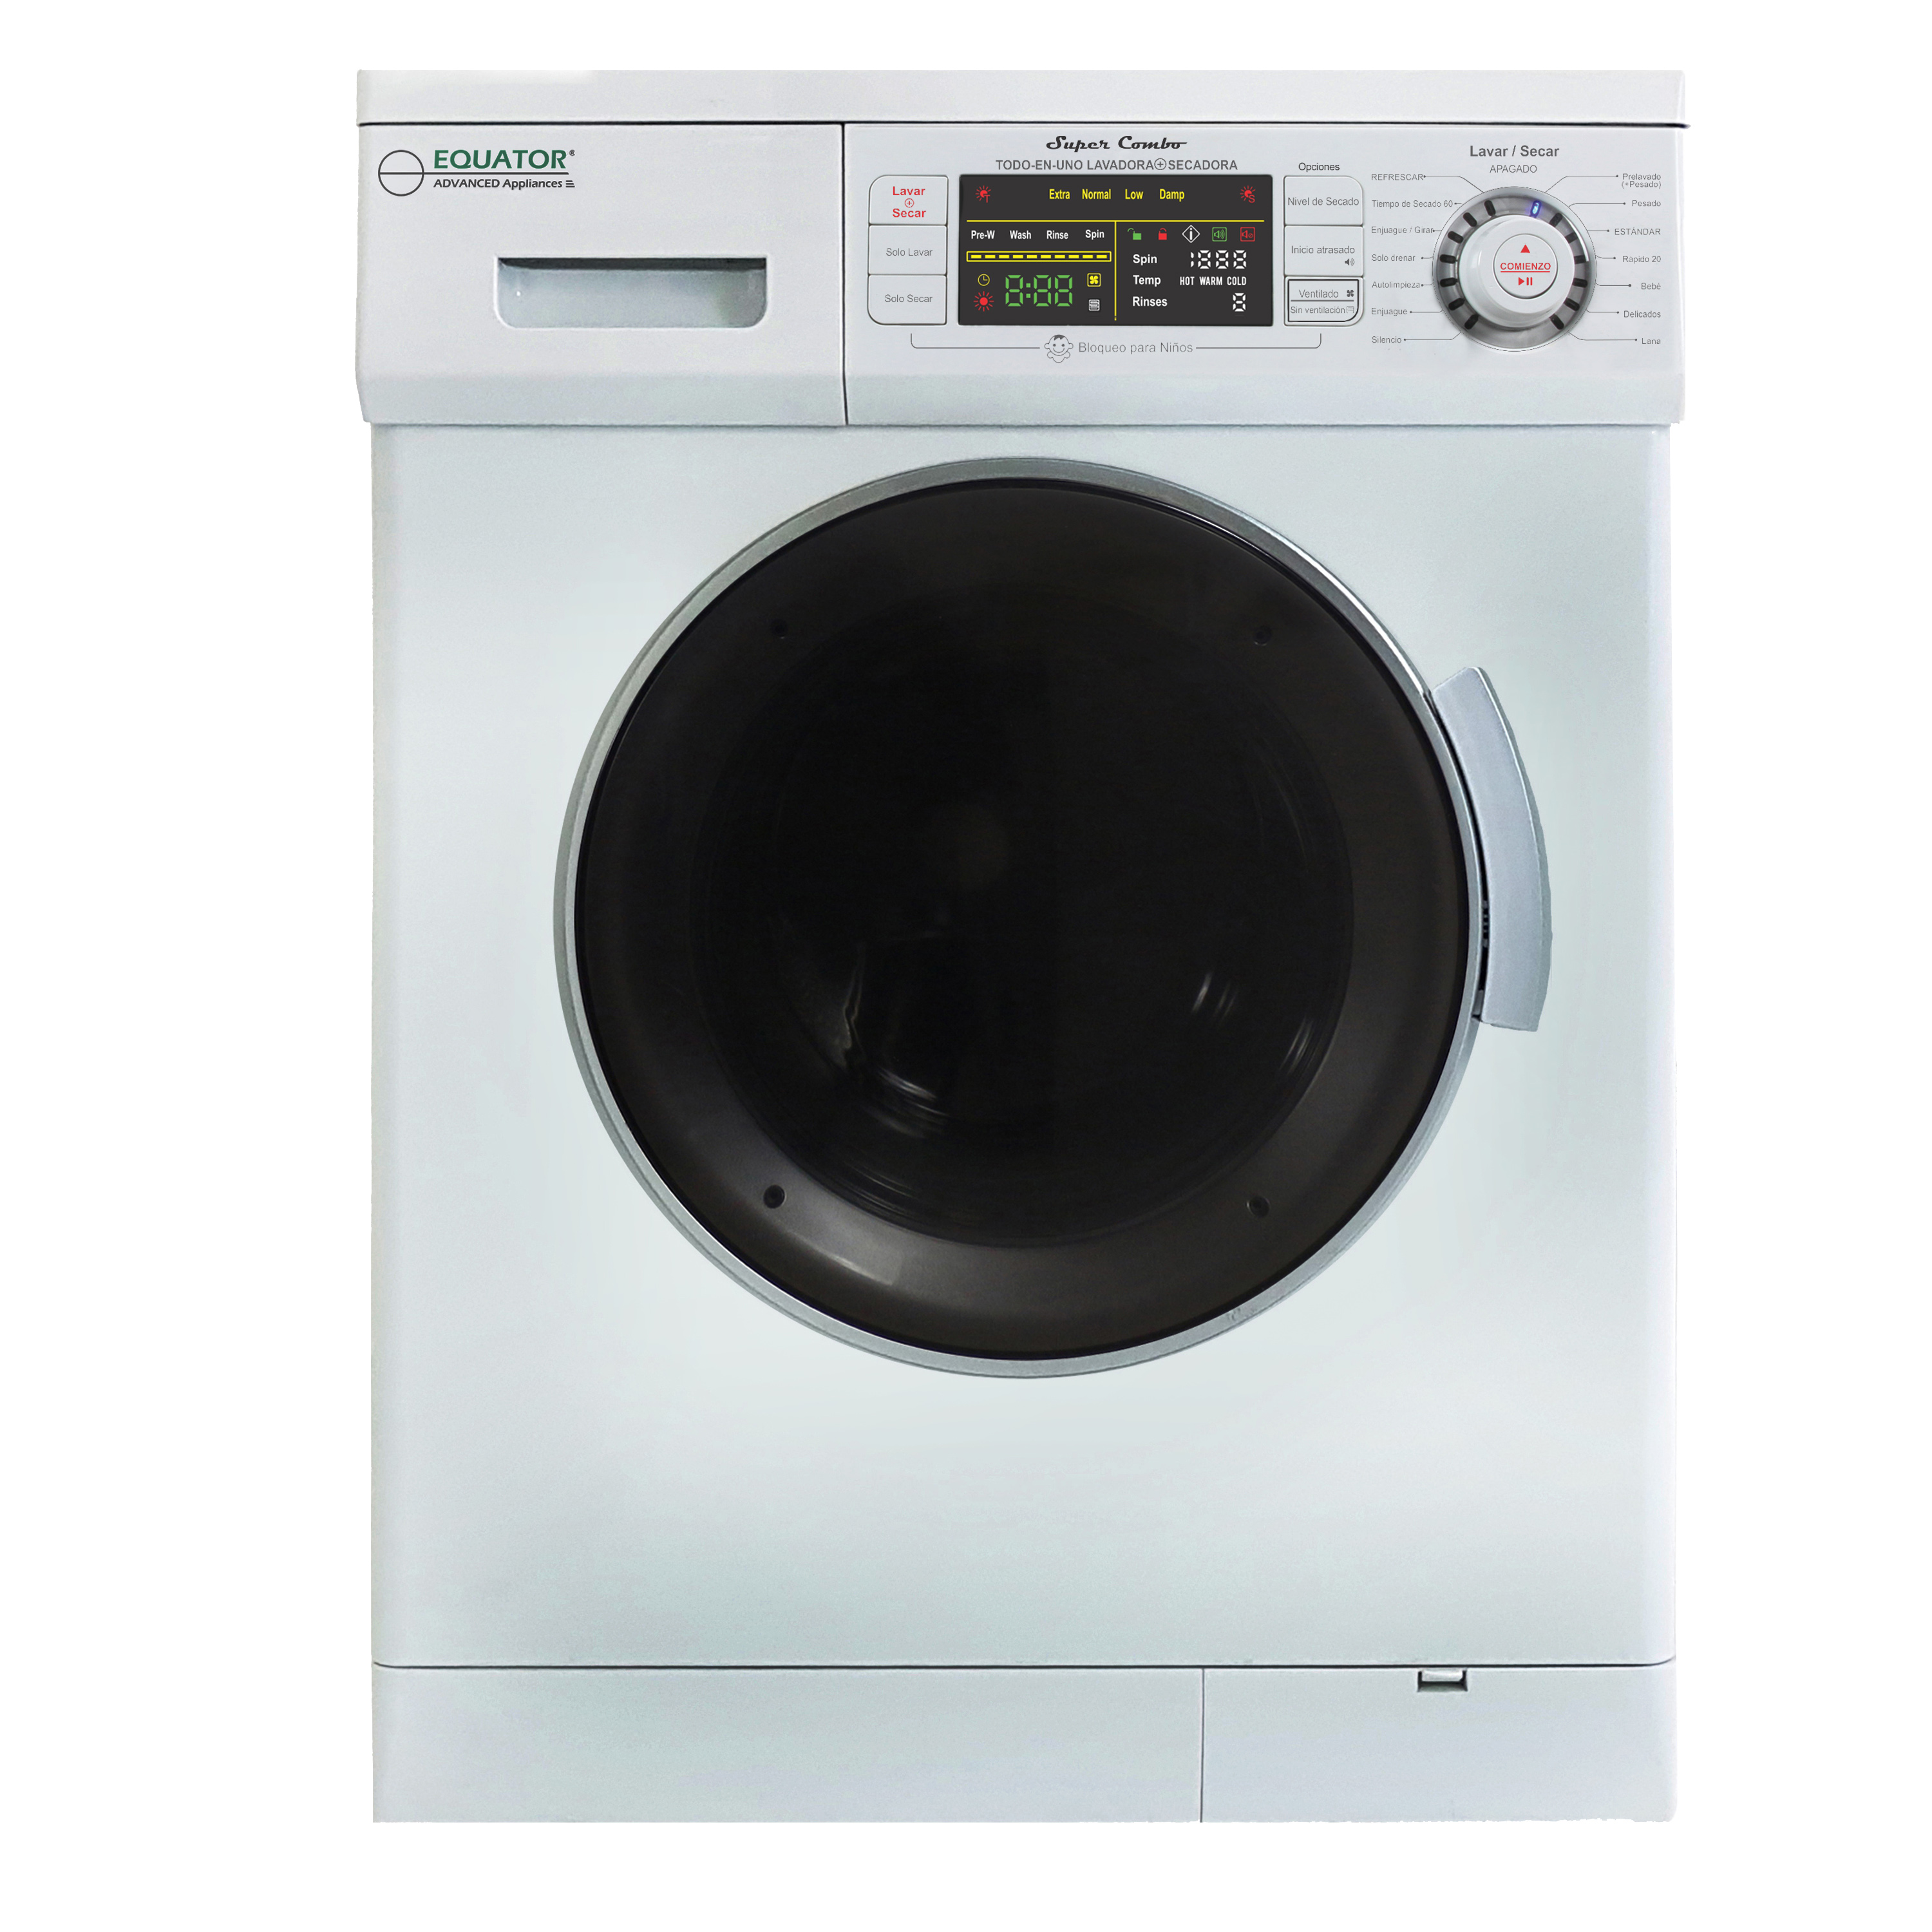 1.57 cu. ft. White High Efficiency Vented / Ventless Electric All-in-One Washer Dryer Combo With Spanish Display